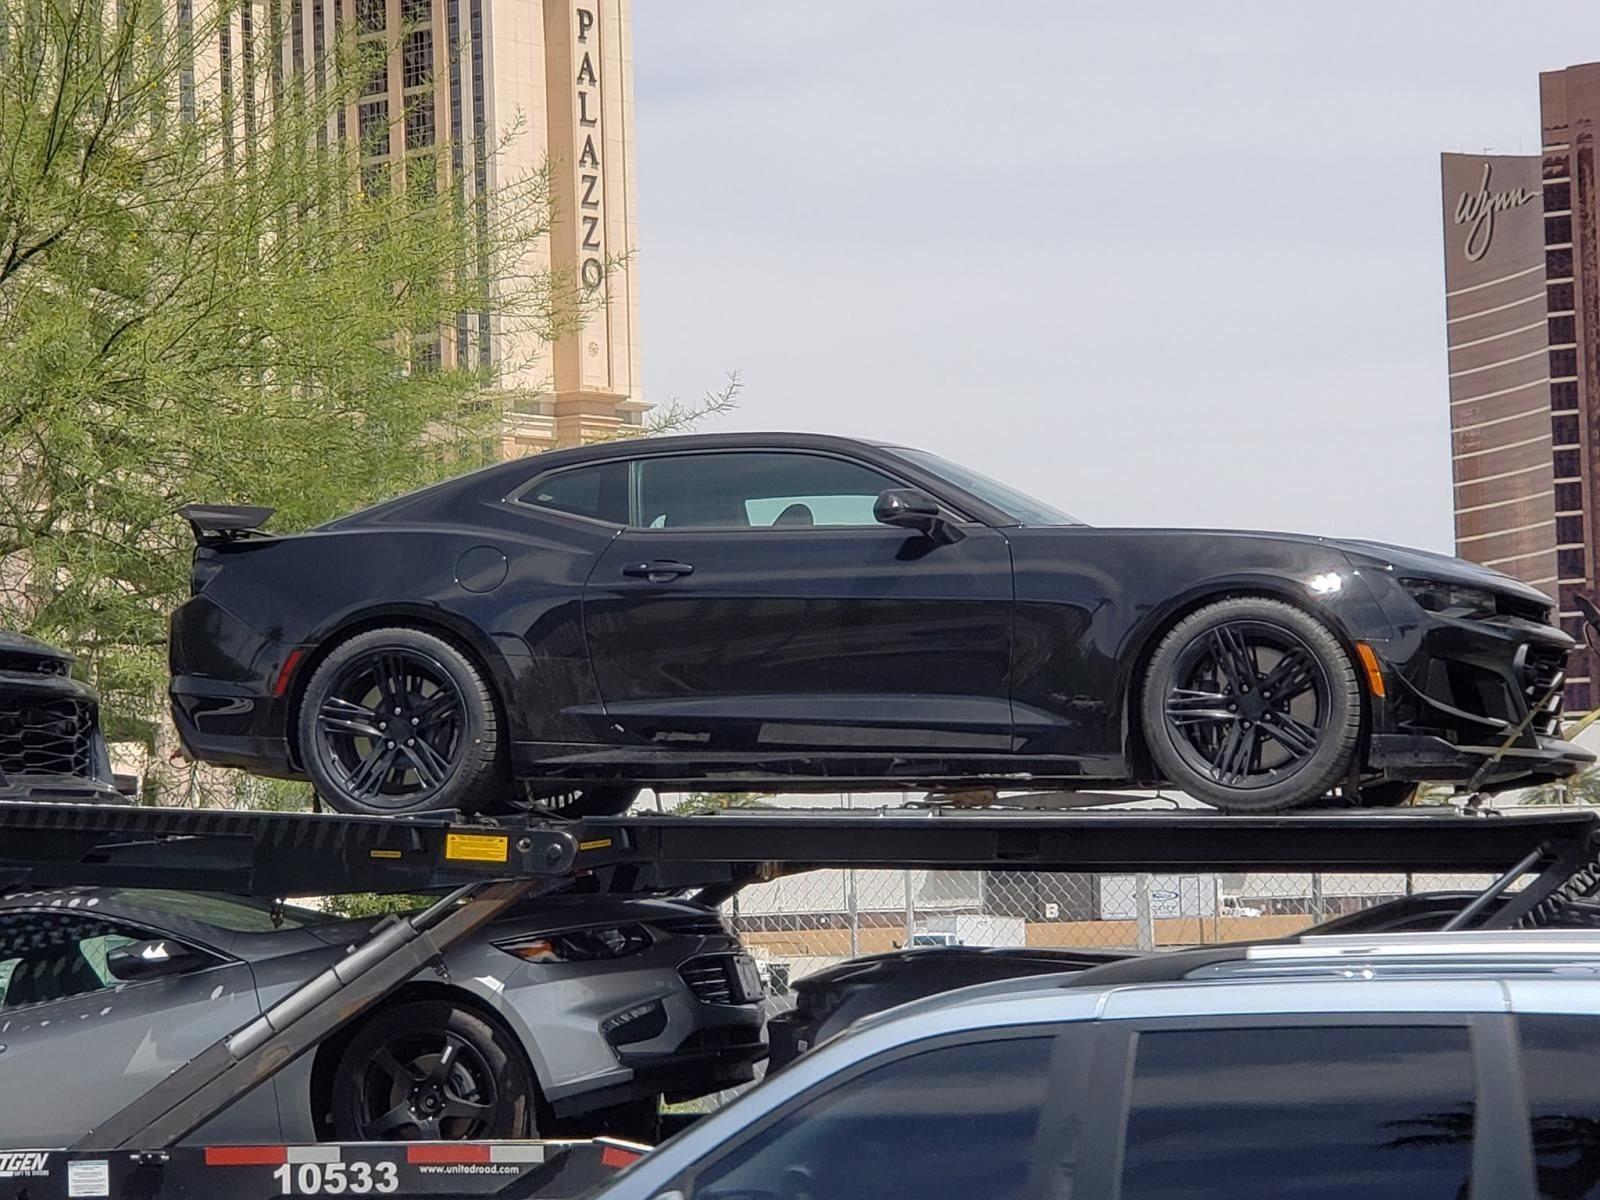 Chevrolet Camaro ZL1 1LE Spotted in the Wild, Shows New Low